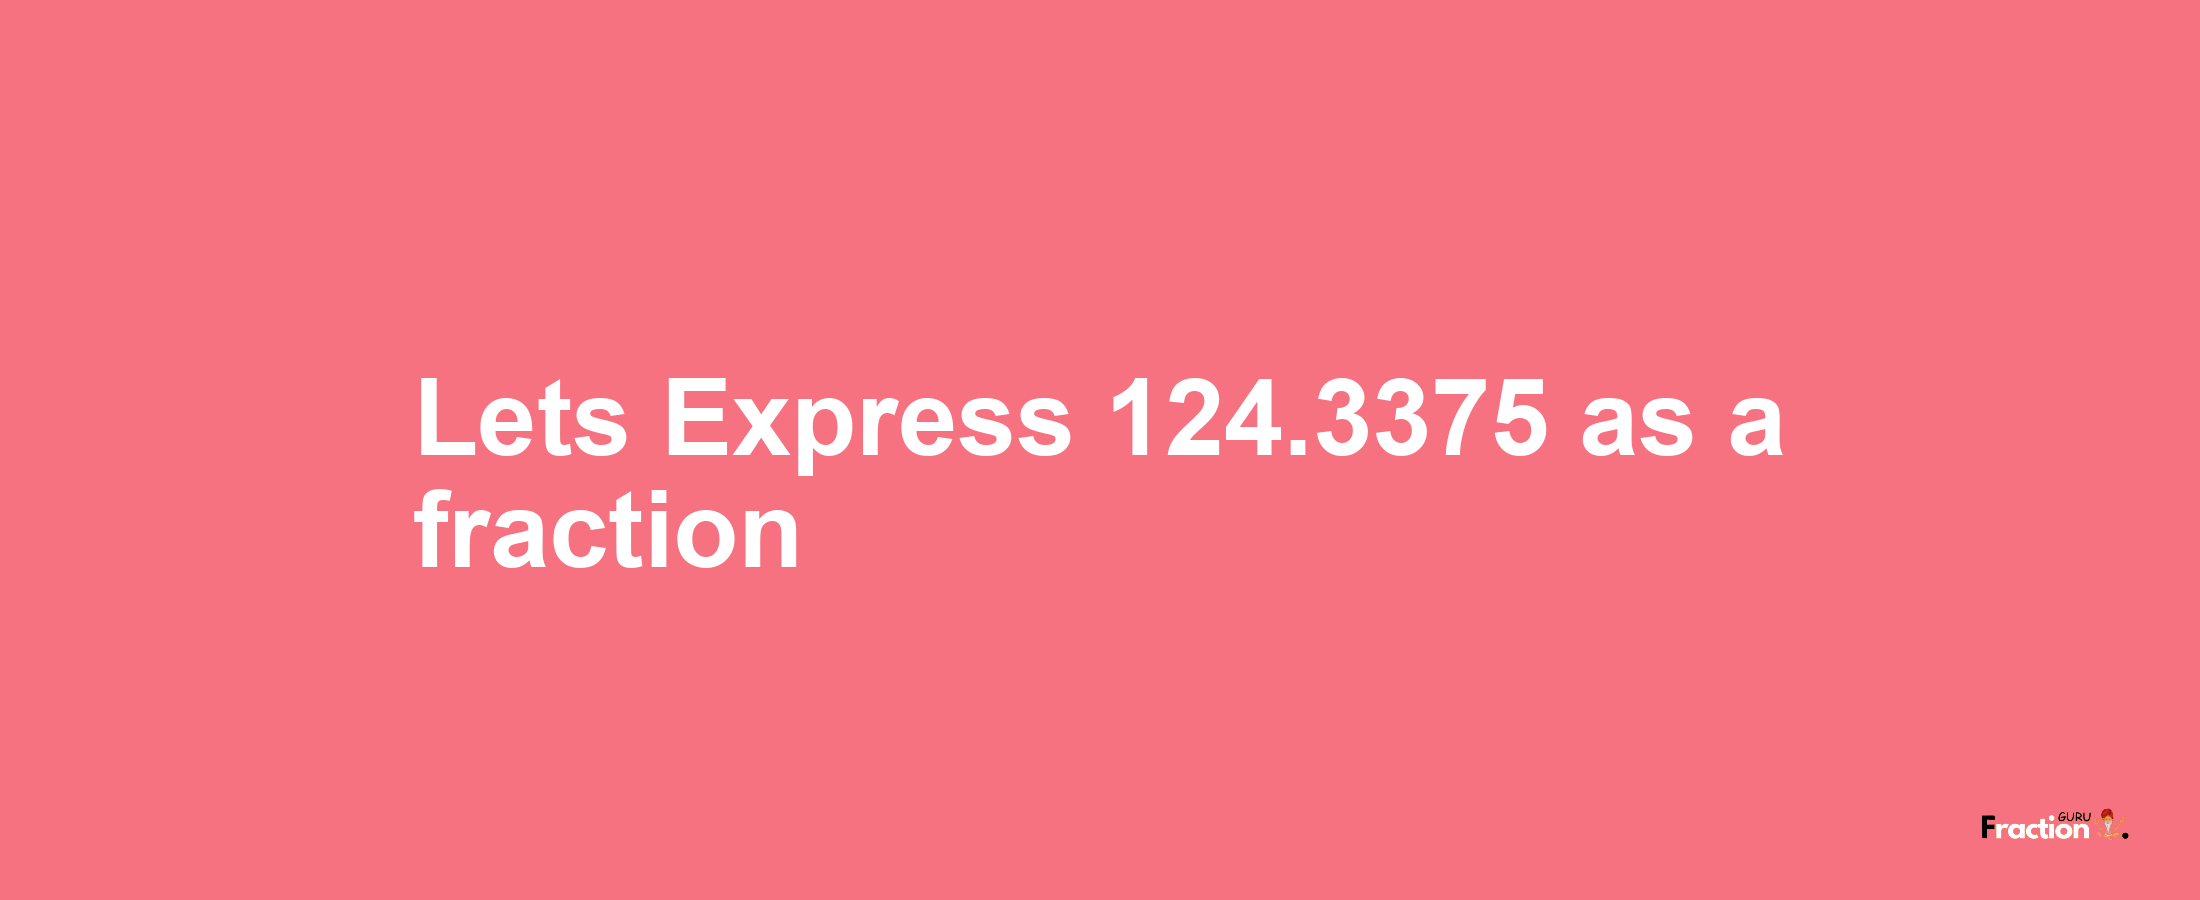 Lets Express 124.3375 as afraction